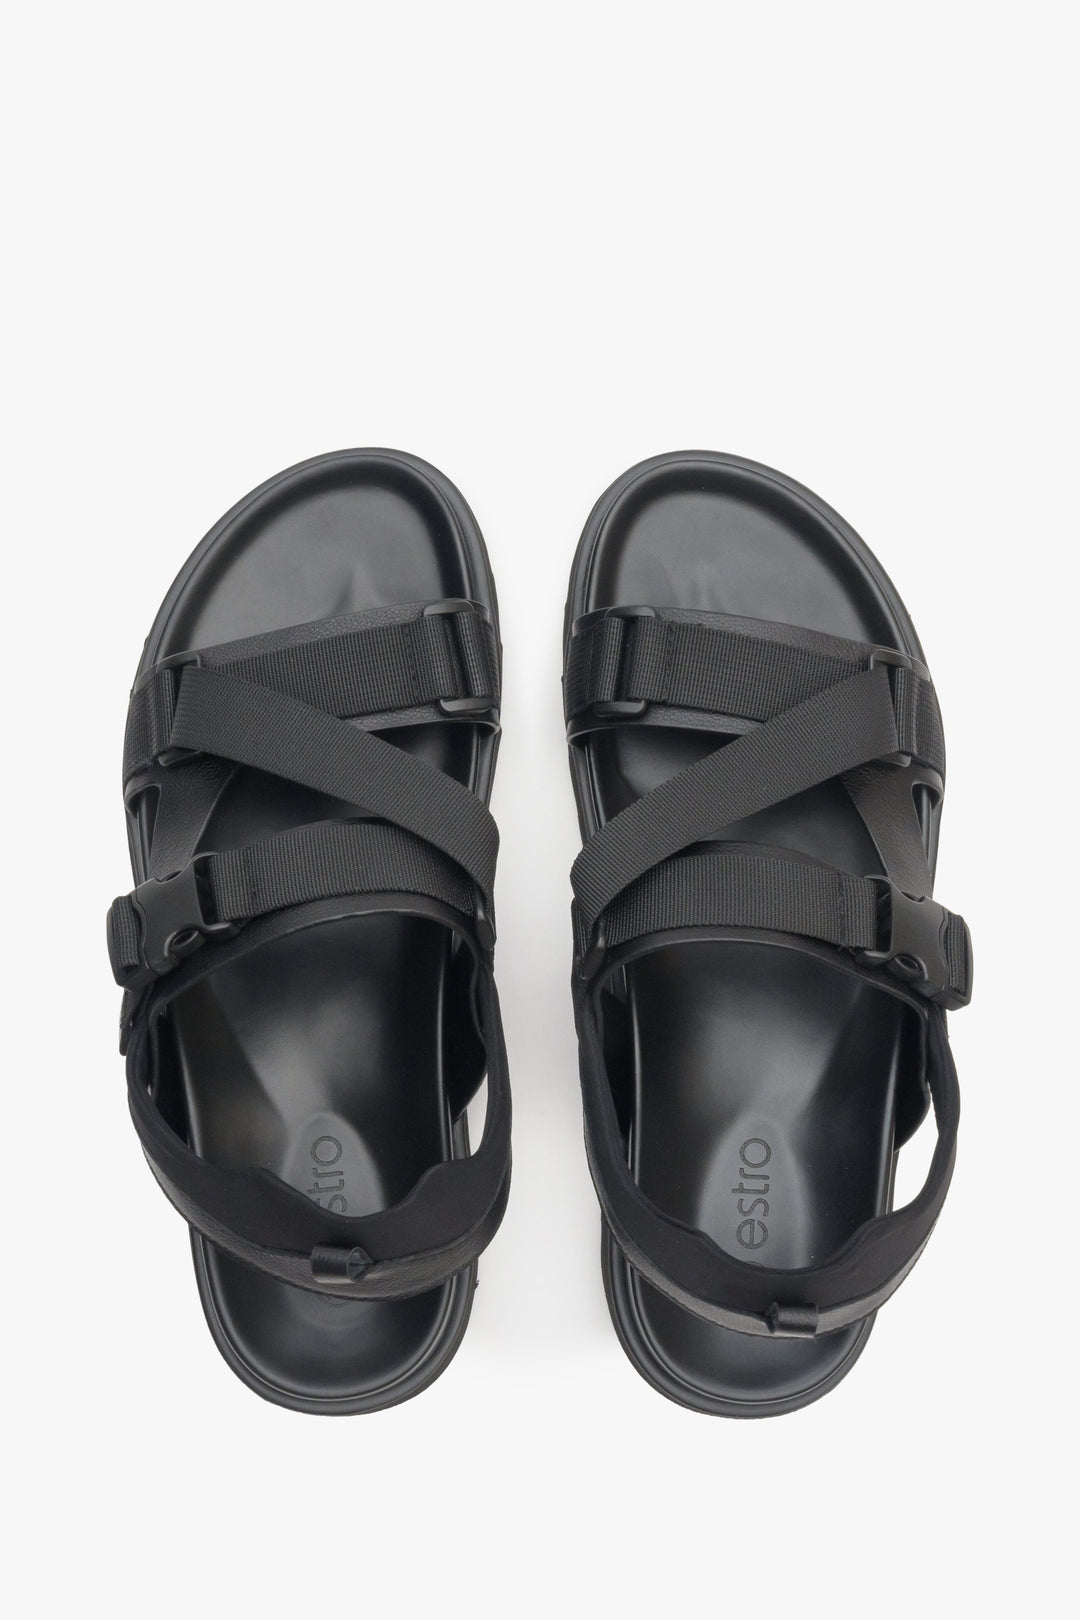 Men's high sandals in black, made from genuine leather and textiles - top view model presentation.